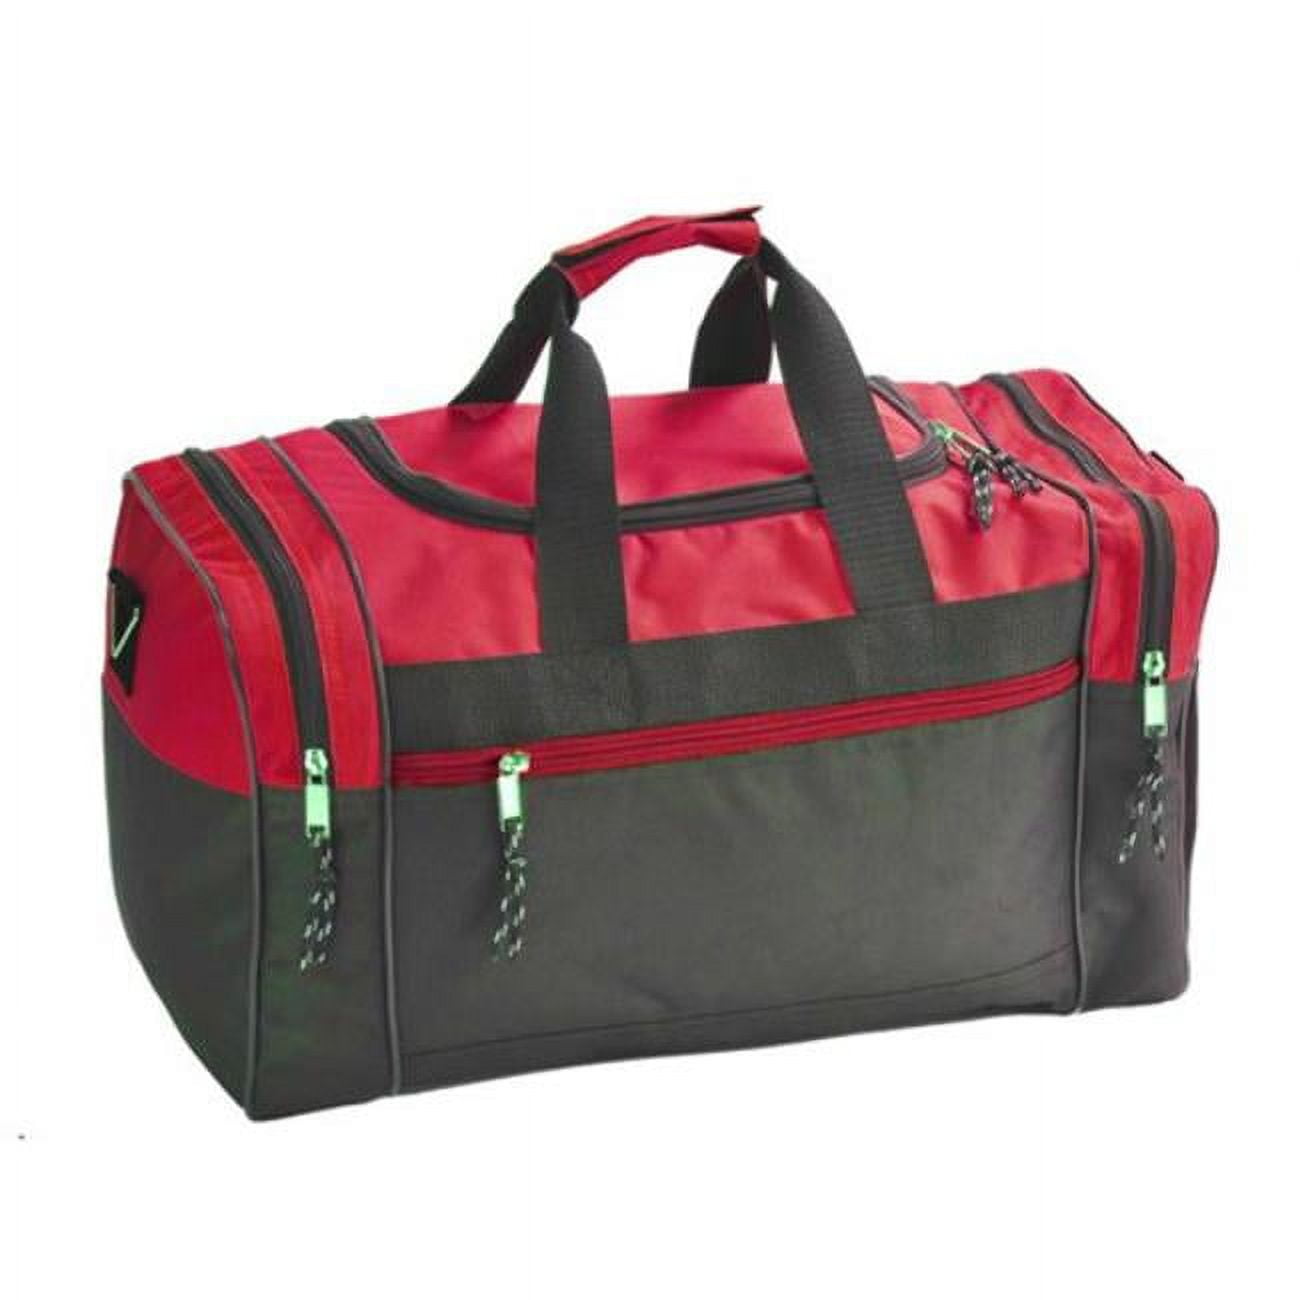 17 In. Poly Duffel Bag - Black & Red, Case Of 24